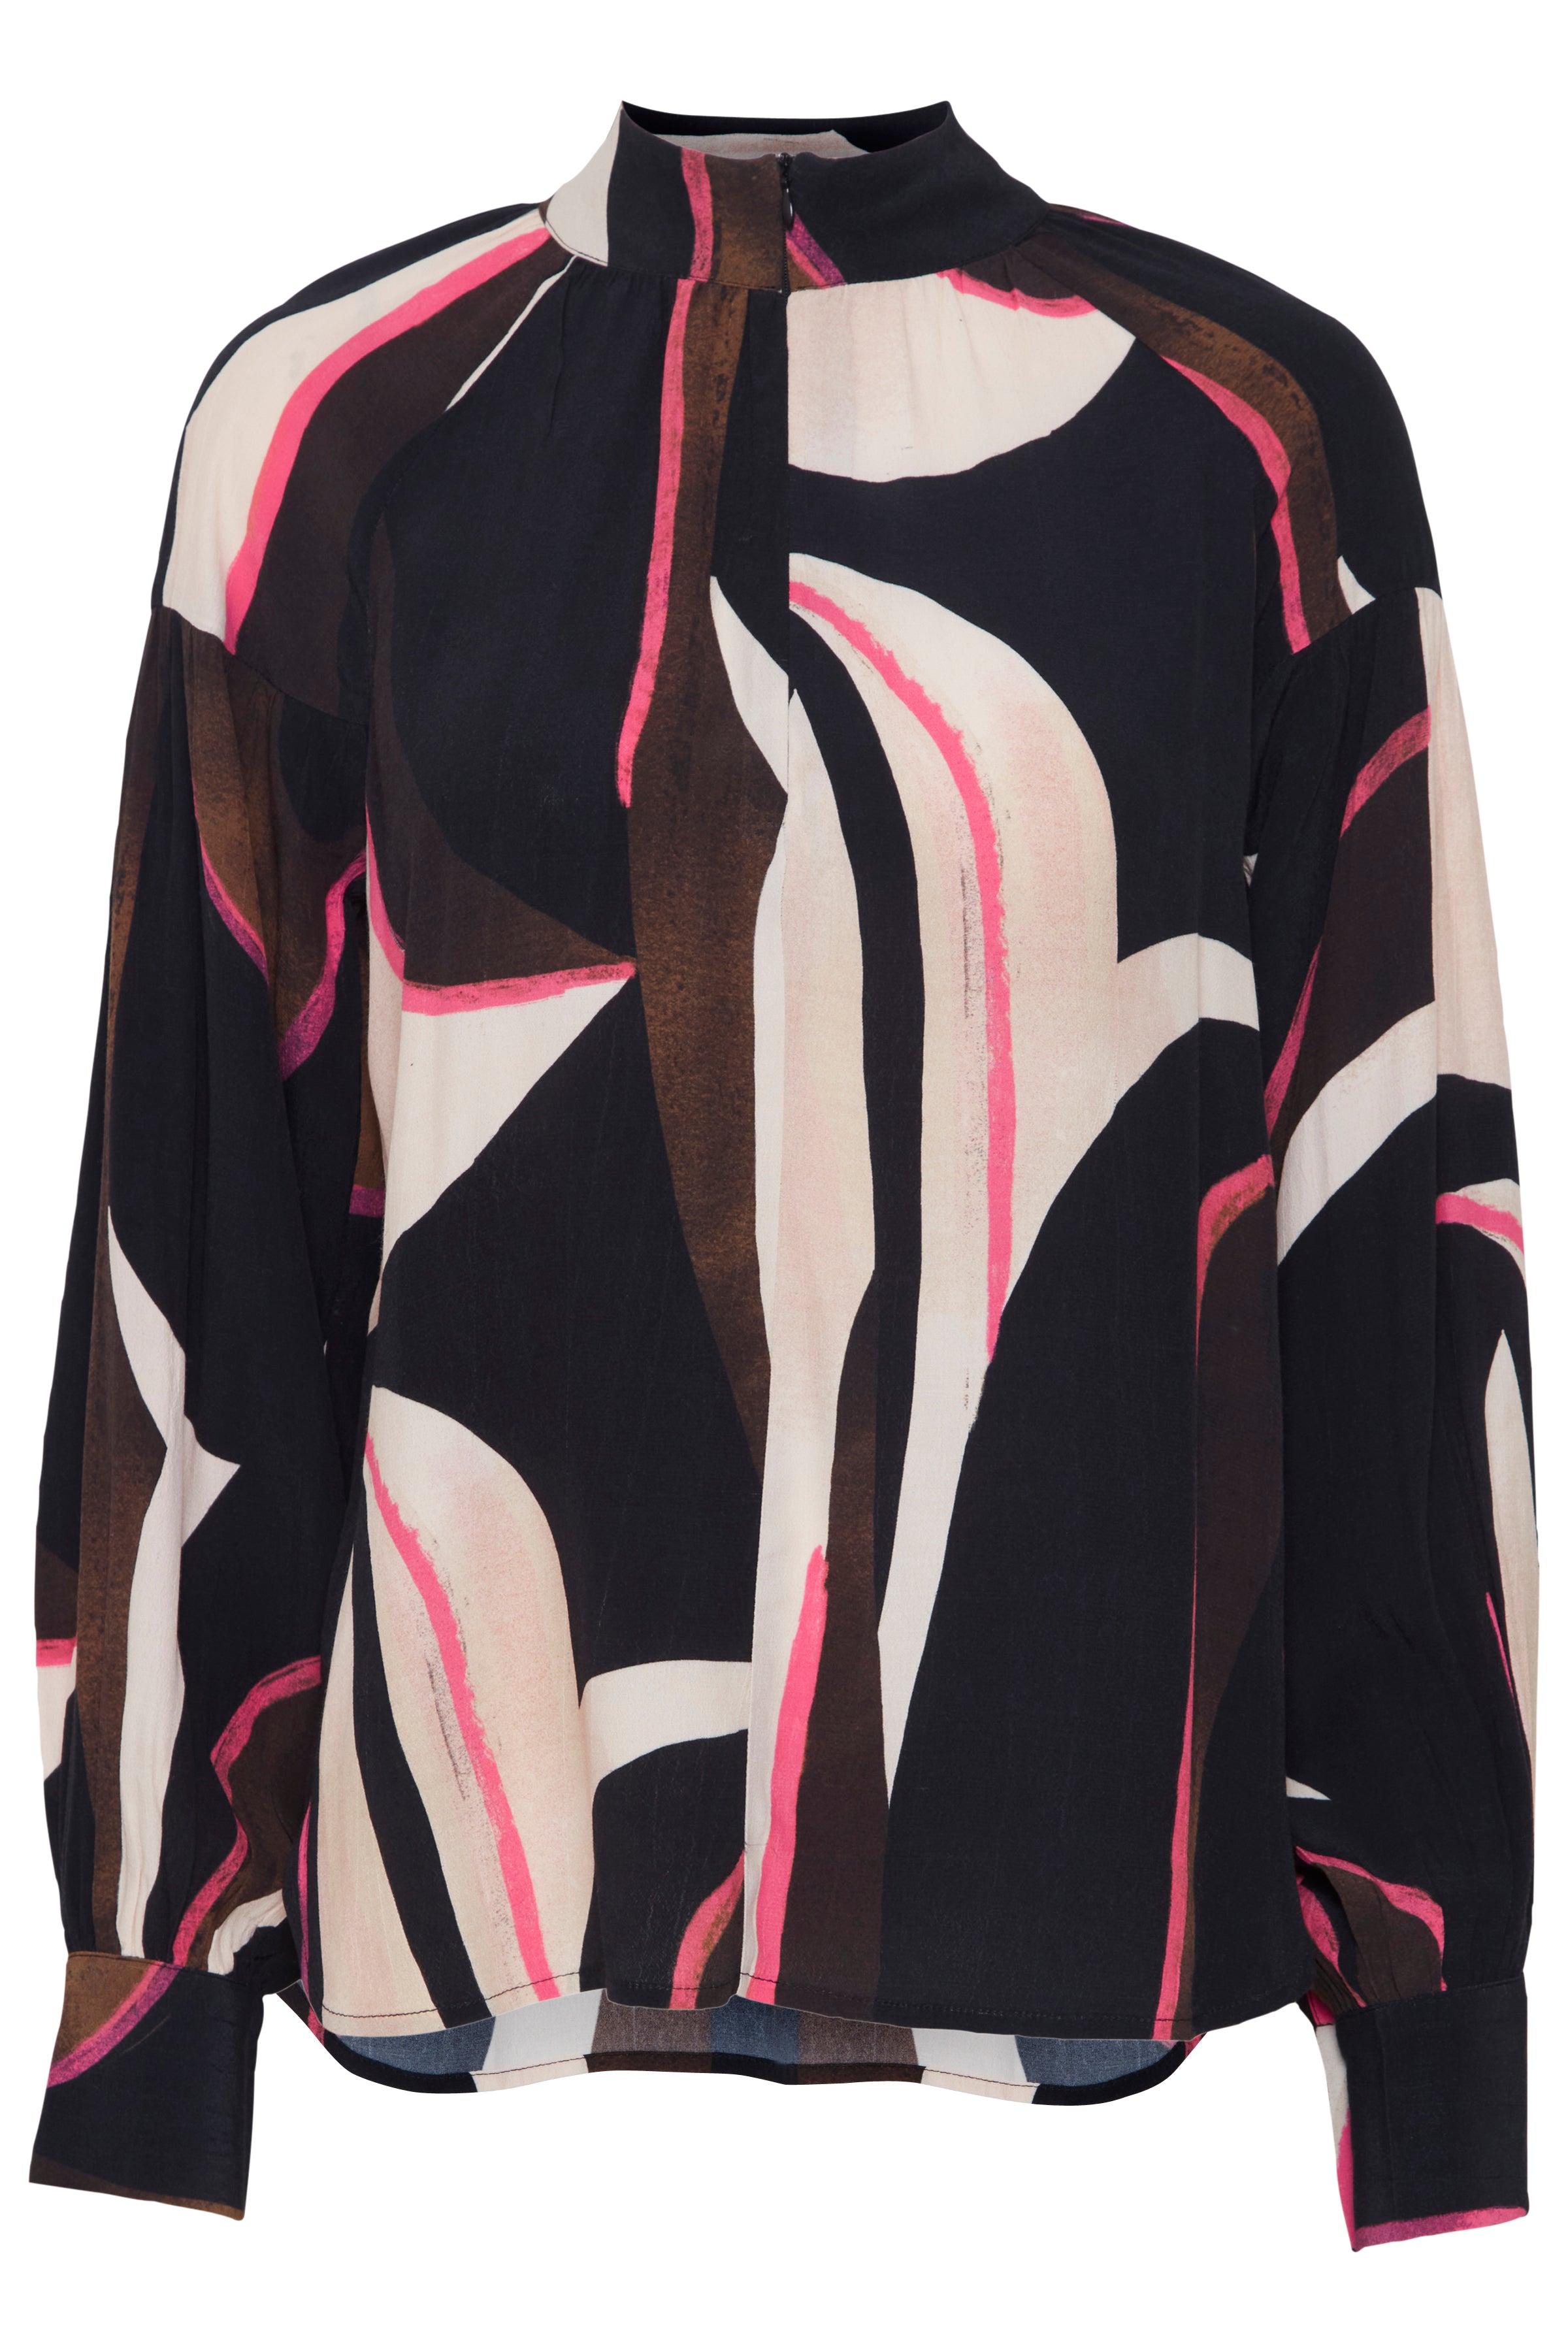 Fransa Frlena Navy Blazer/Pink Printed Blouse, Ruby 20613285 Abstract – Boutique 67